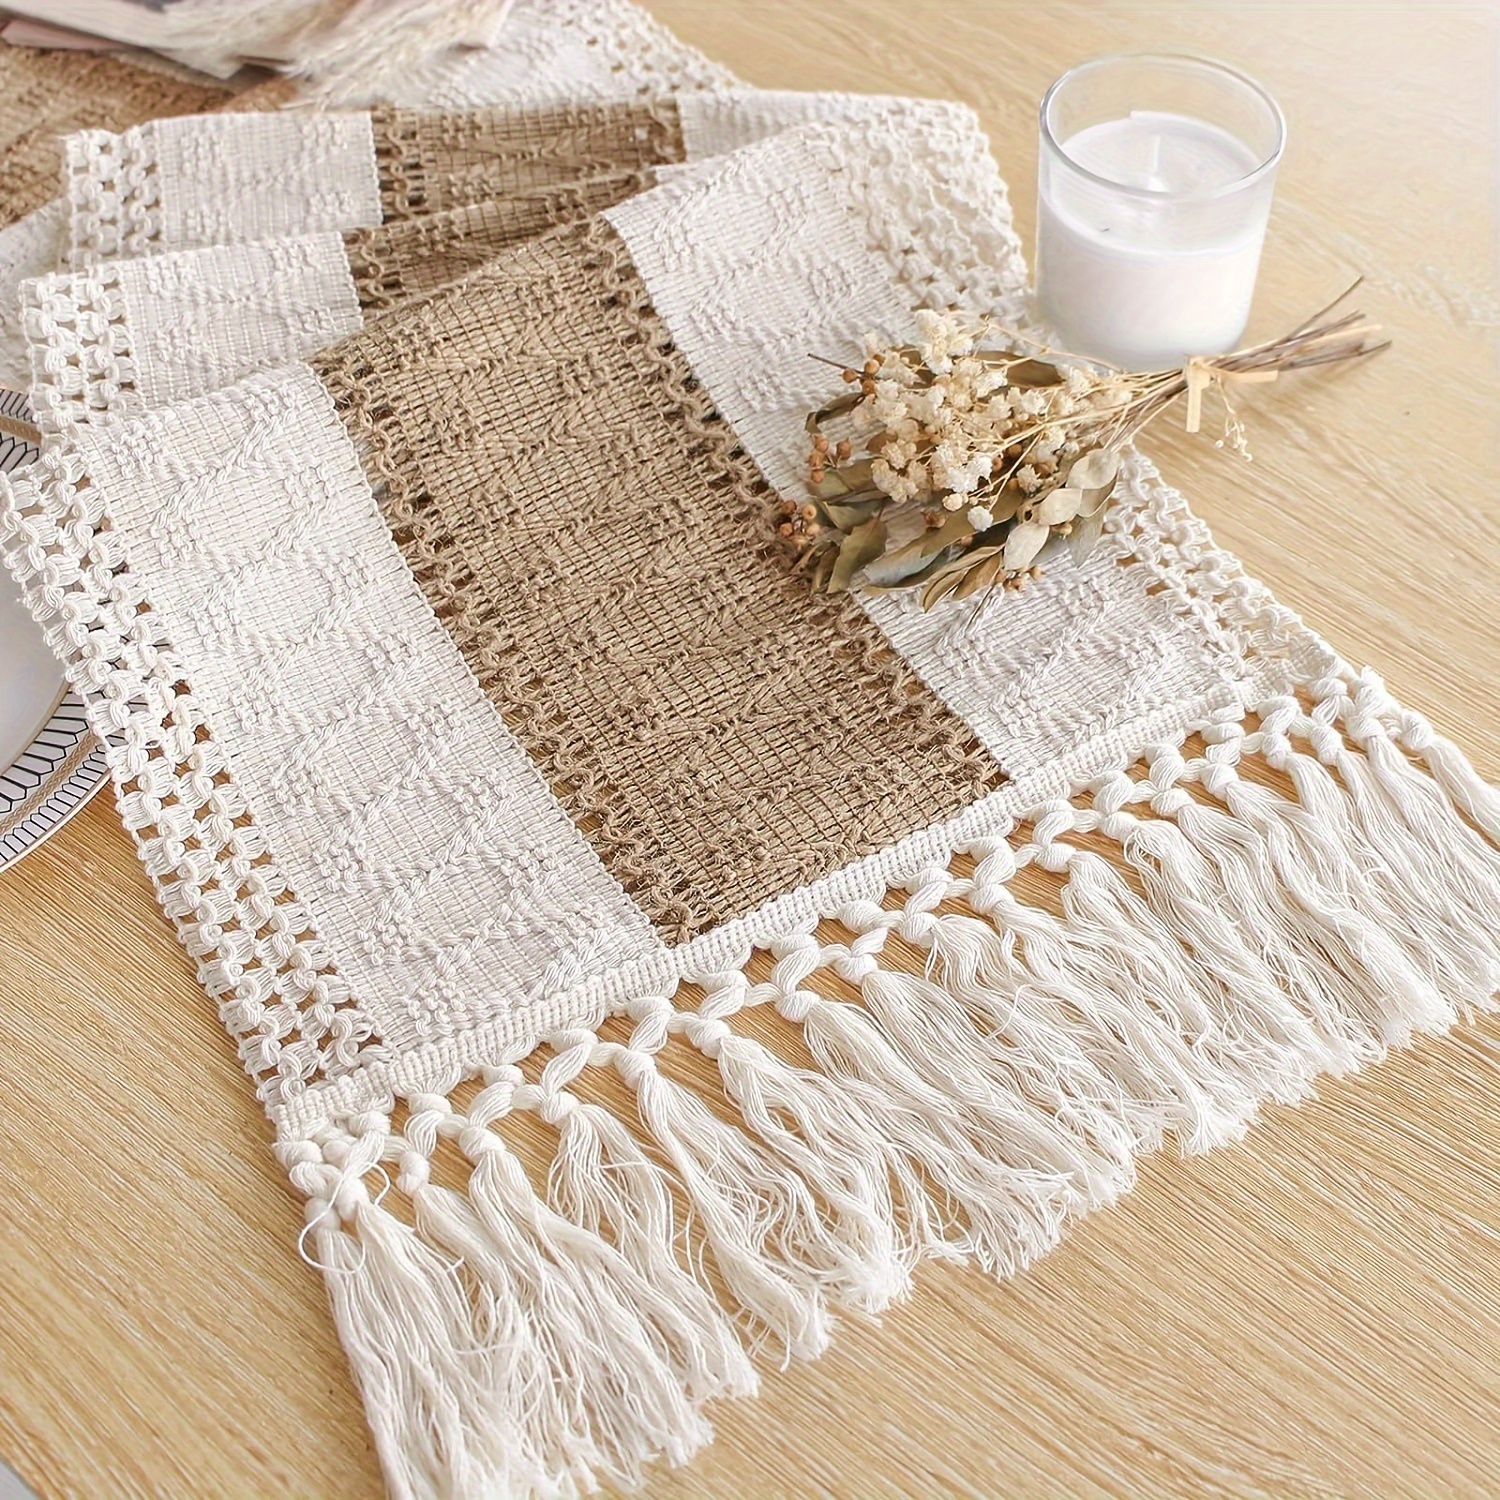 

Boho Tassel Table Runner, 1pc Cotton Linen Woven Striped Tablecloth, Jute Thread Long Strip Dining Decor For Wedding, Party Supplies, Holiday Decoration